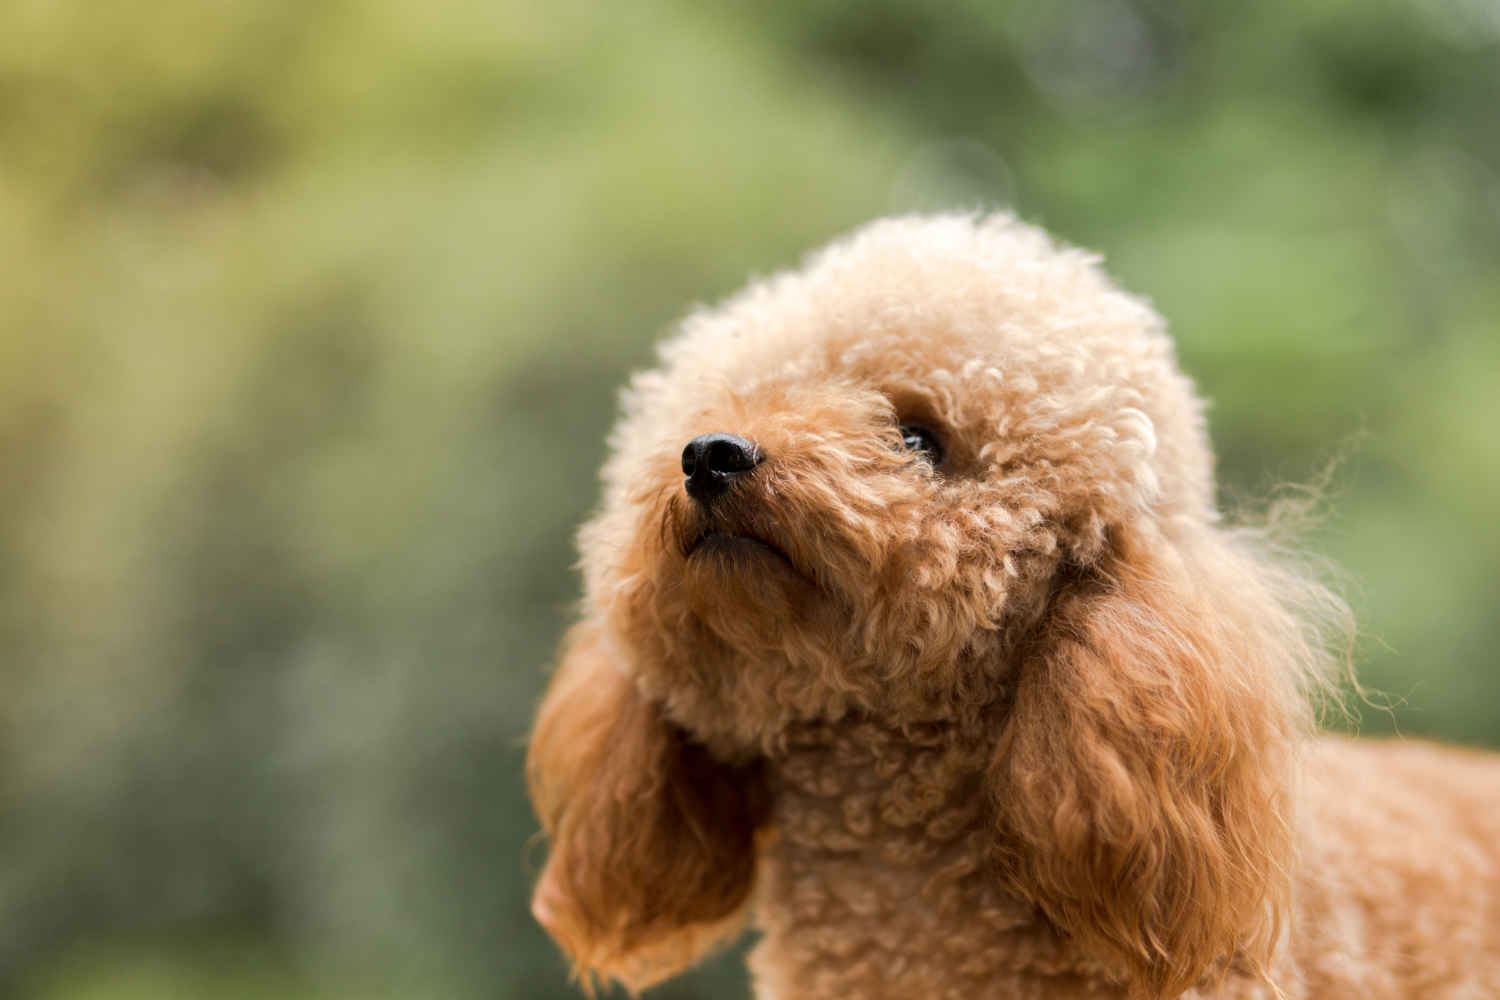 How did you handle house-training your Poodle puppy?